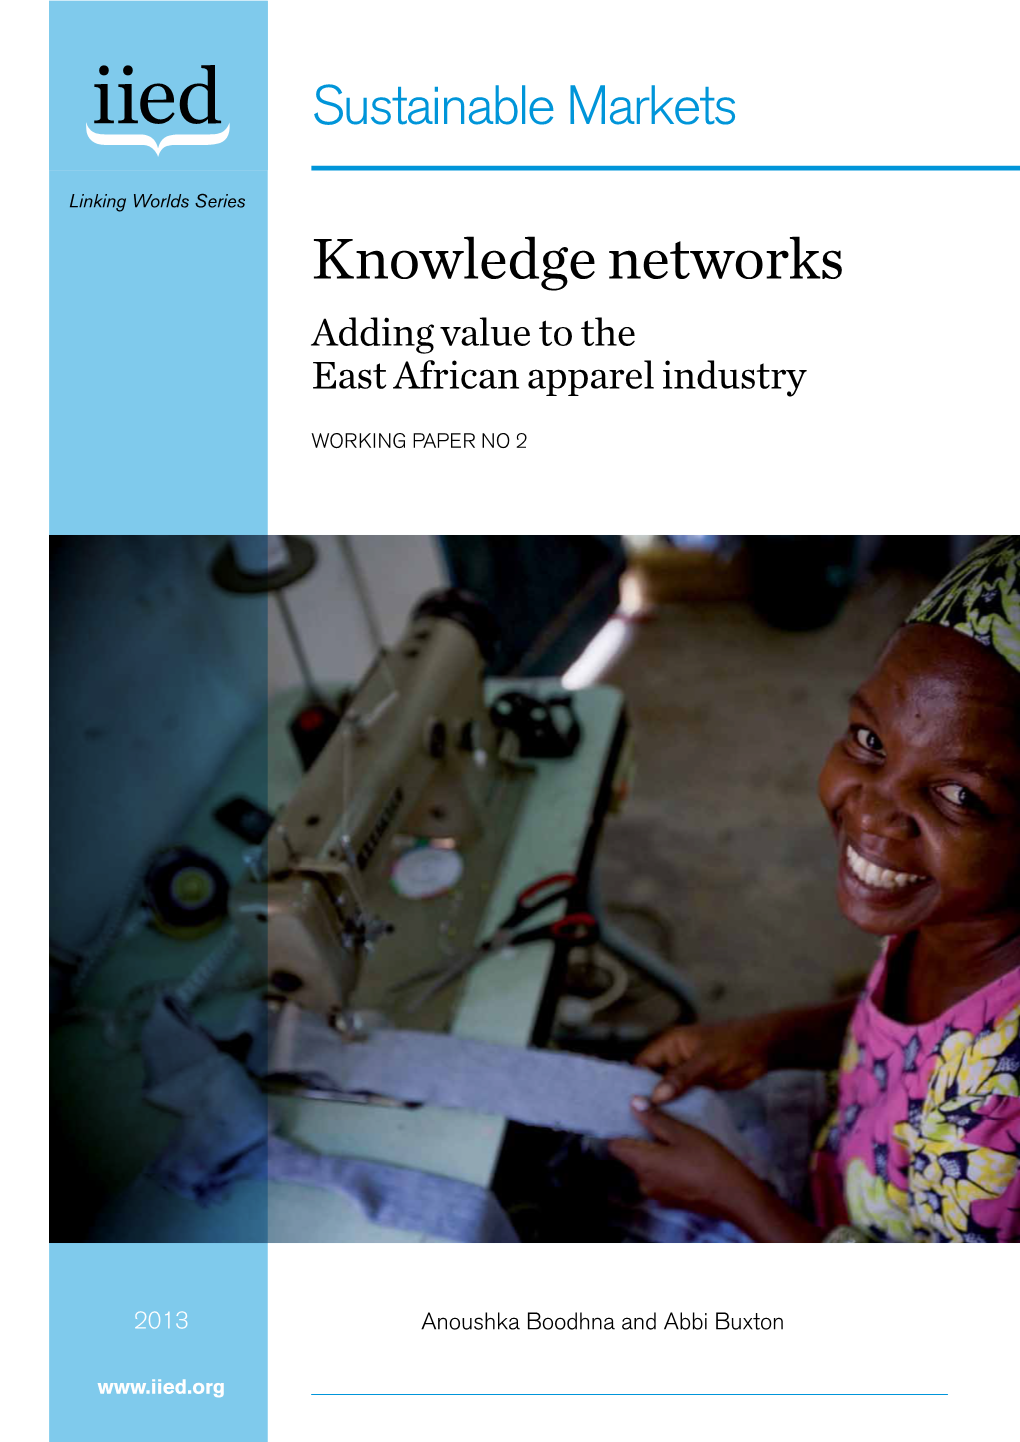 Knowledge Networks Adding Value to the East African Apparel Industry